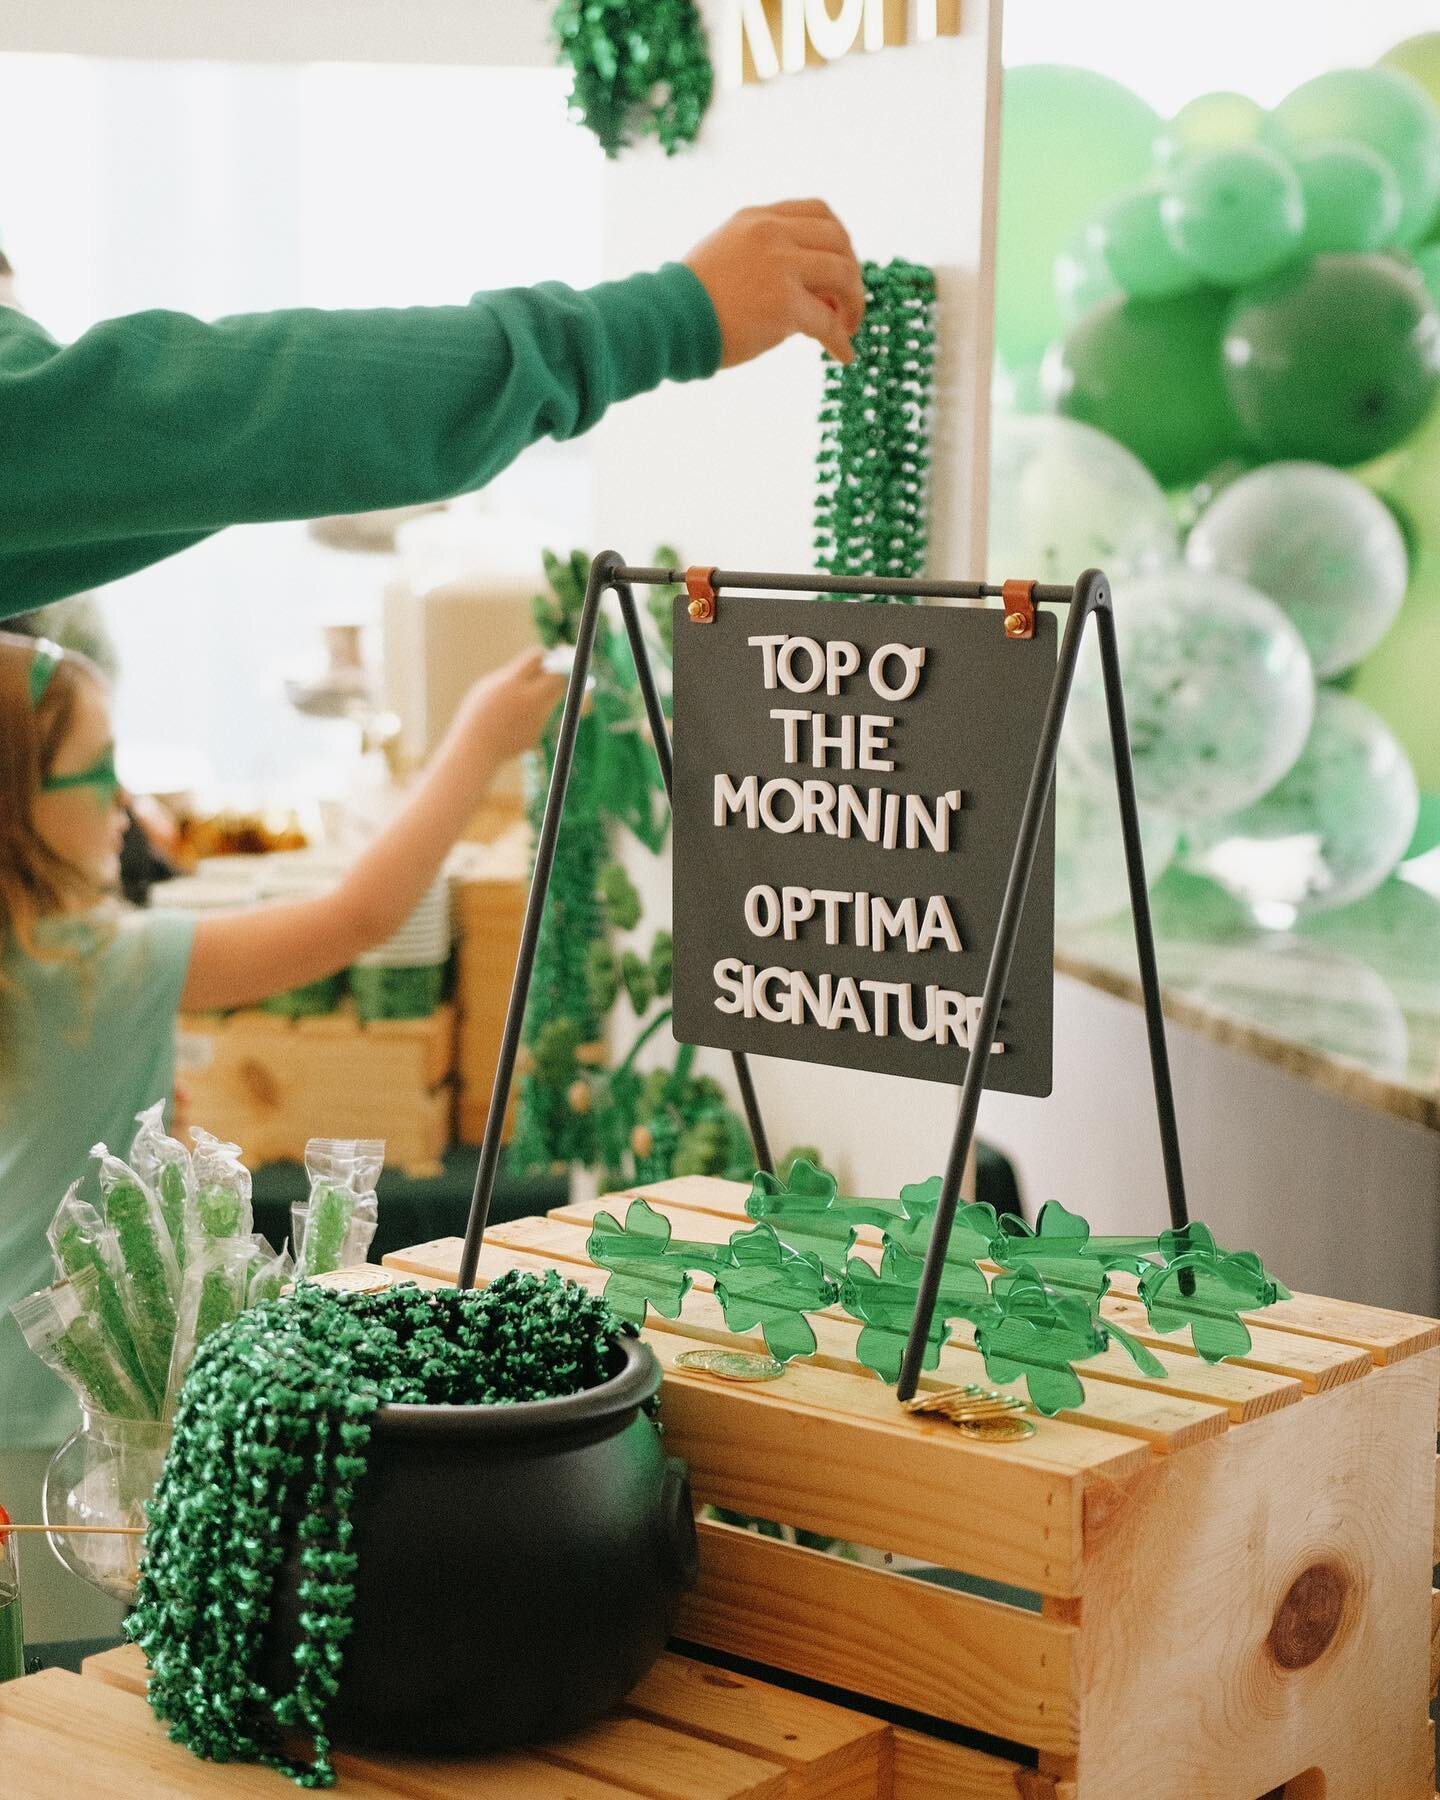 Happy St. Patrick&rsquo;s Day! ☘️ 

We have been celebrating the luck of the CHIrish big time the past two weeks and have loved every minute of it! From delicious green bagels to bubbly rainbow mimosas to the cutest St. Paddy&rsquo;s Day swag - we&rs